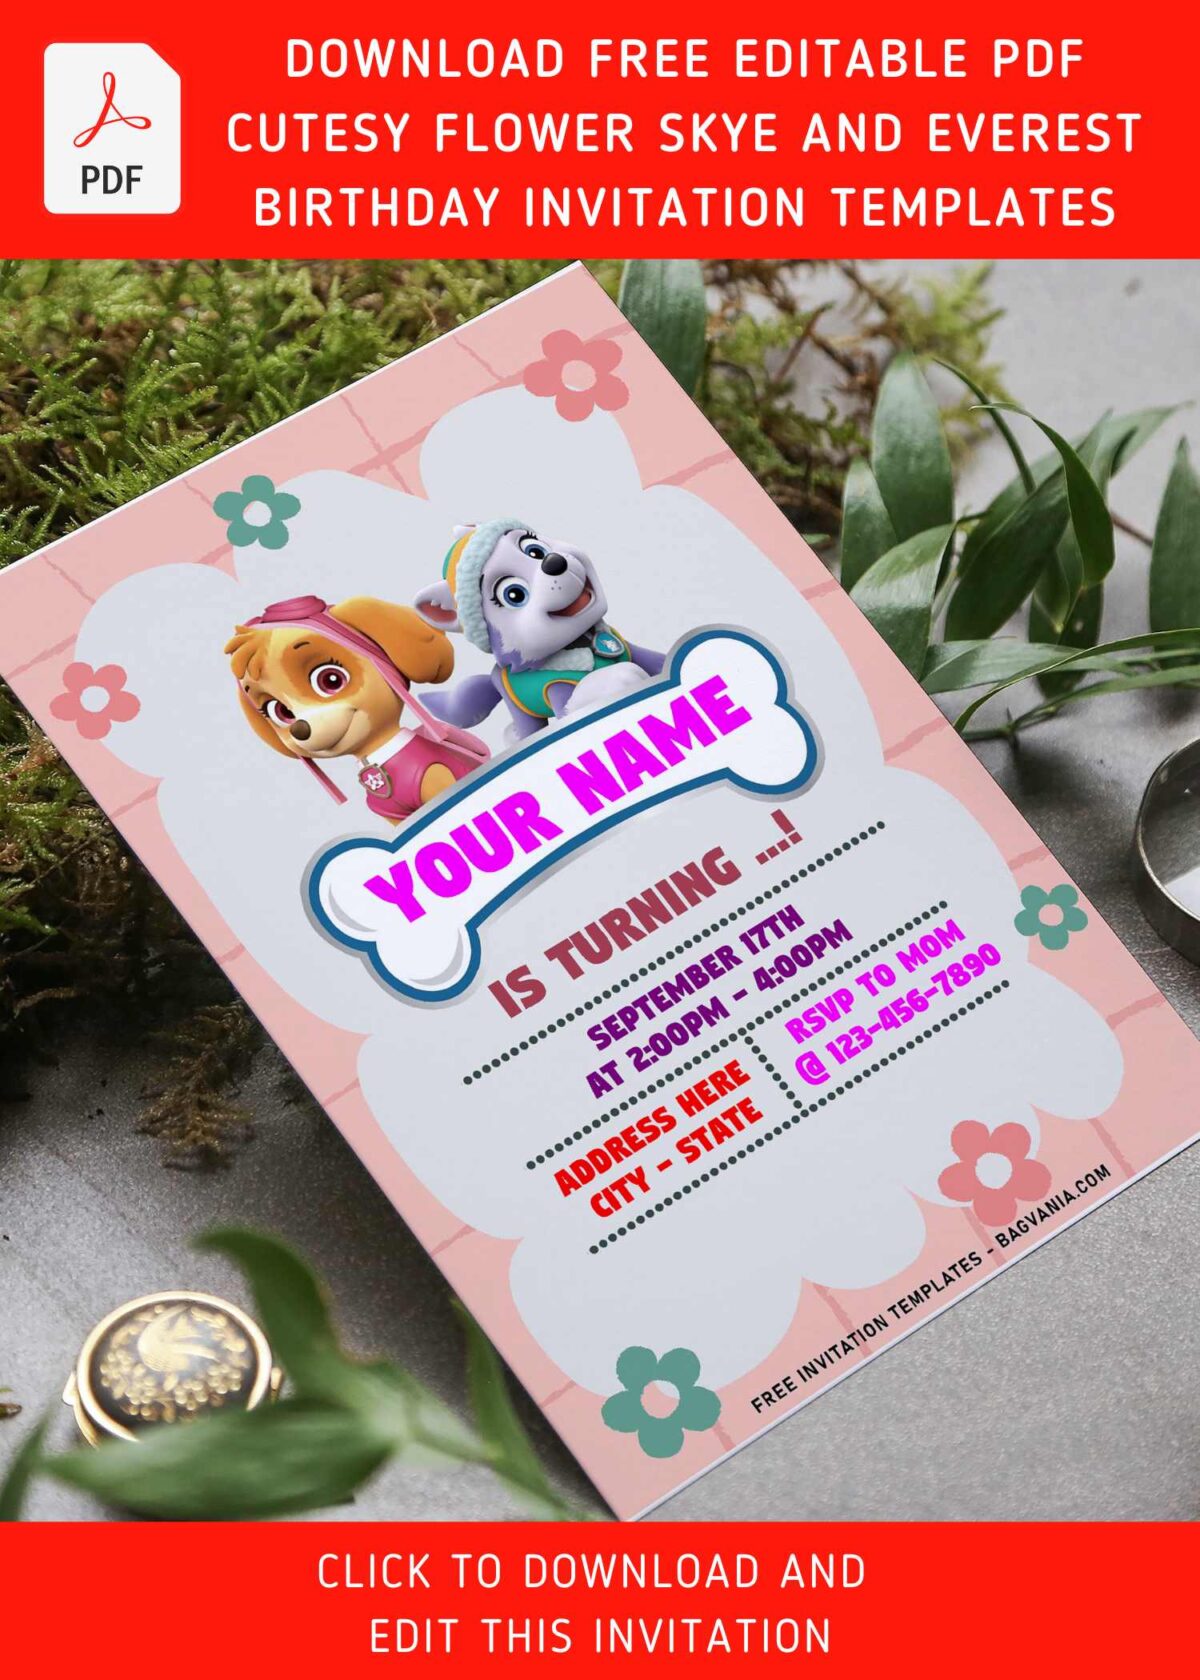 (Free Editable PDF) Quirky Cute Skye And Everest PAW Patrol Birthday Invitation Templates with adorable Skye